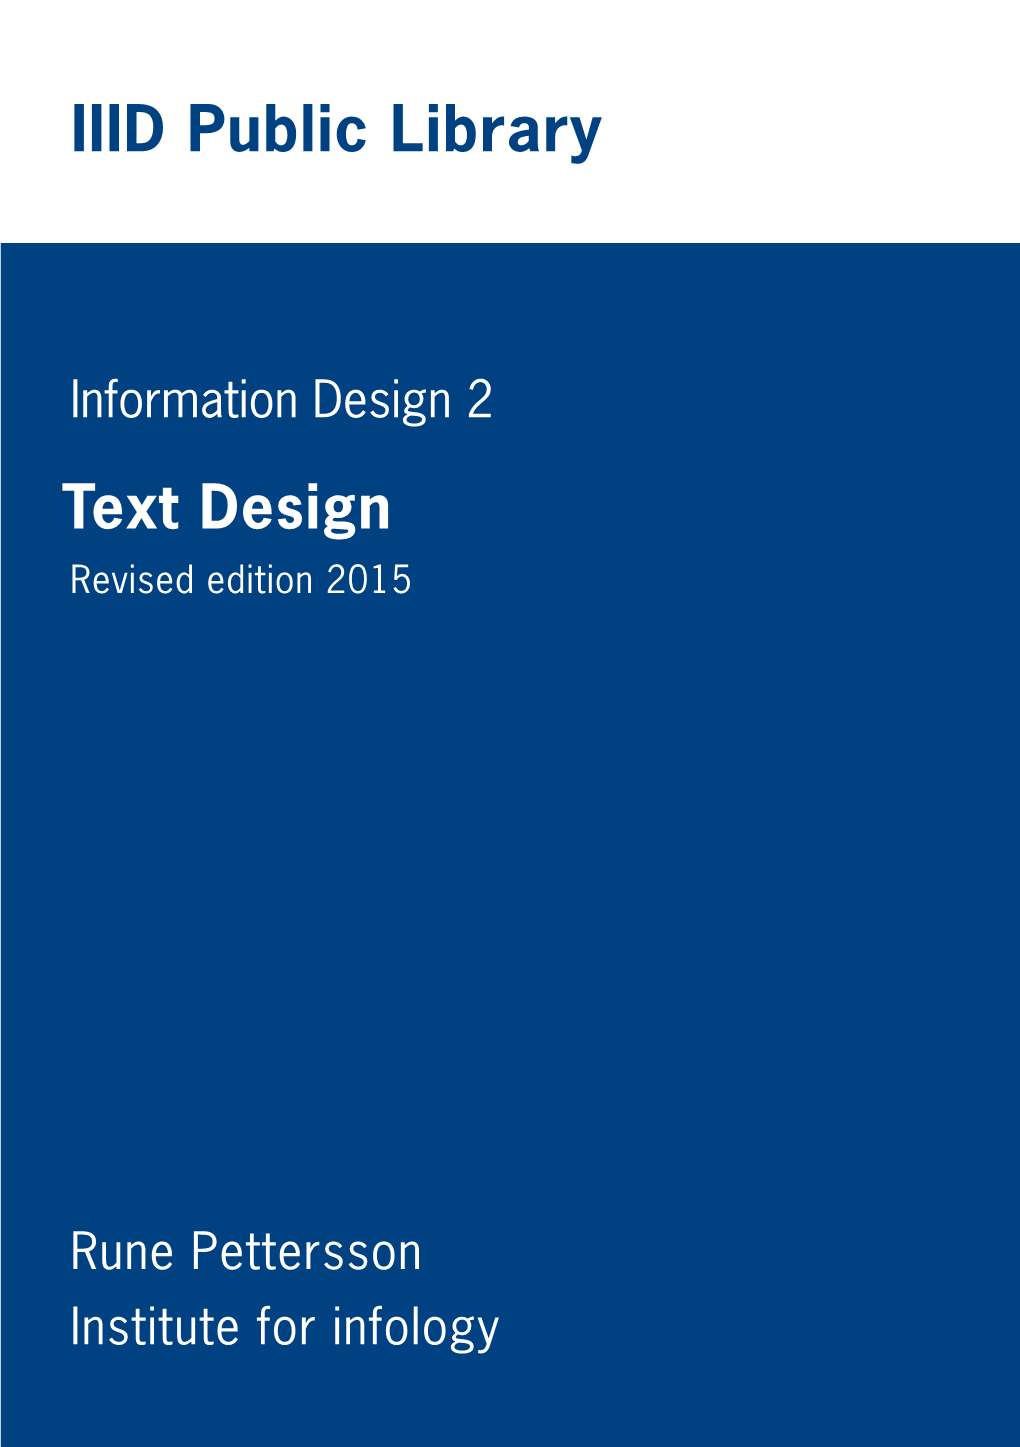 Text Design Revised Edition 2015